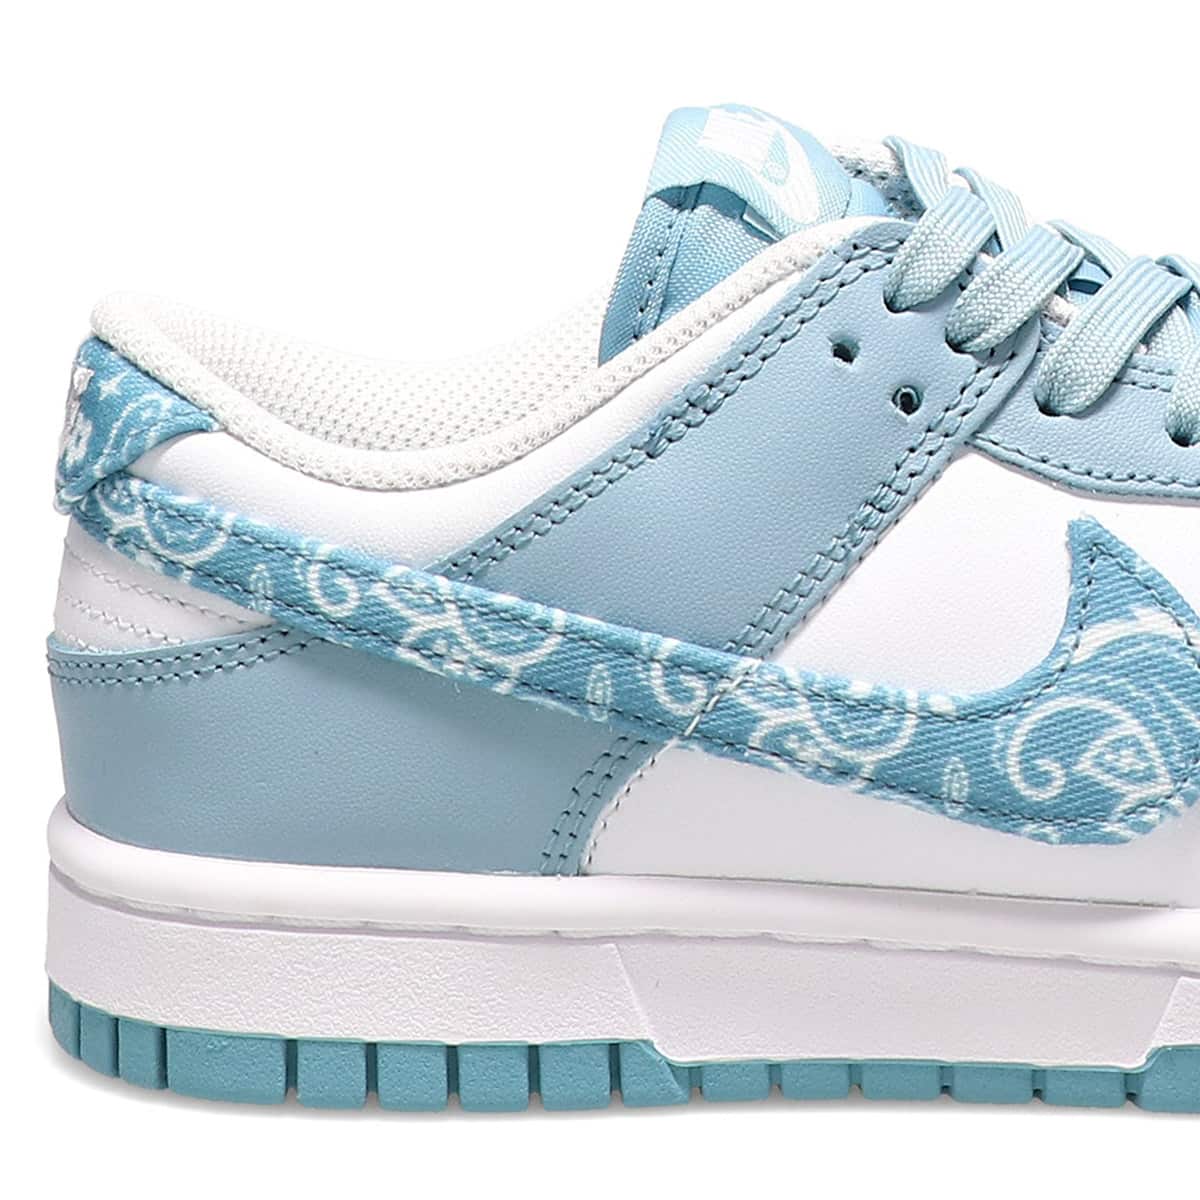 Nike Dunk Low Blue Paisley DH4401 101 Release Date 8